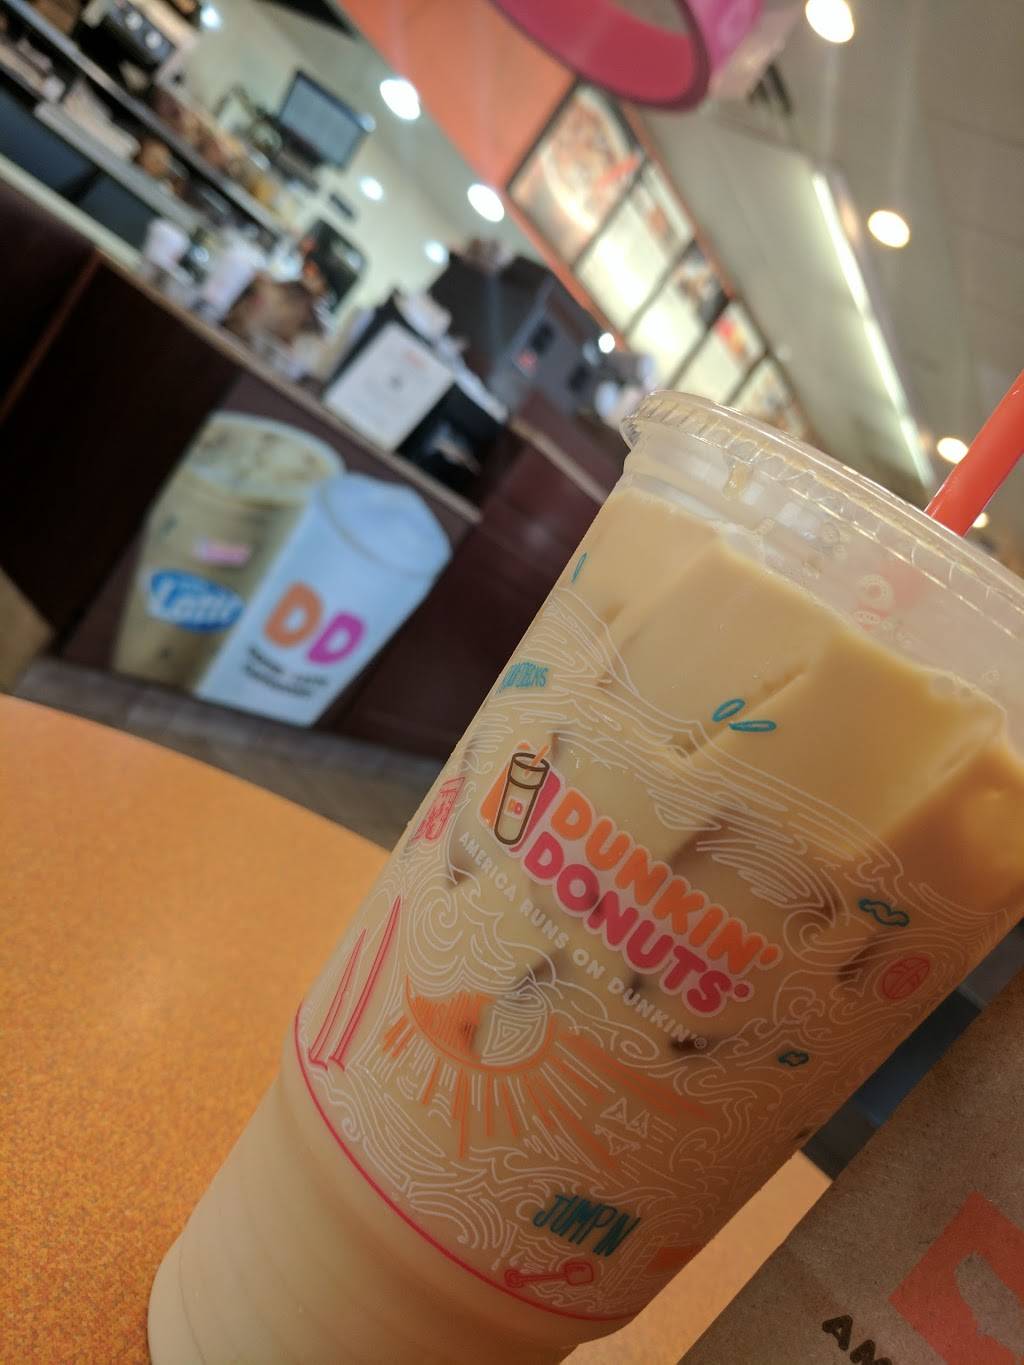 Dunkin Donuts | cafe | 240 S Summit Ave # 256, Hackensack, NJ 07601, USA | 2013424790 OR +1 201-342-4790